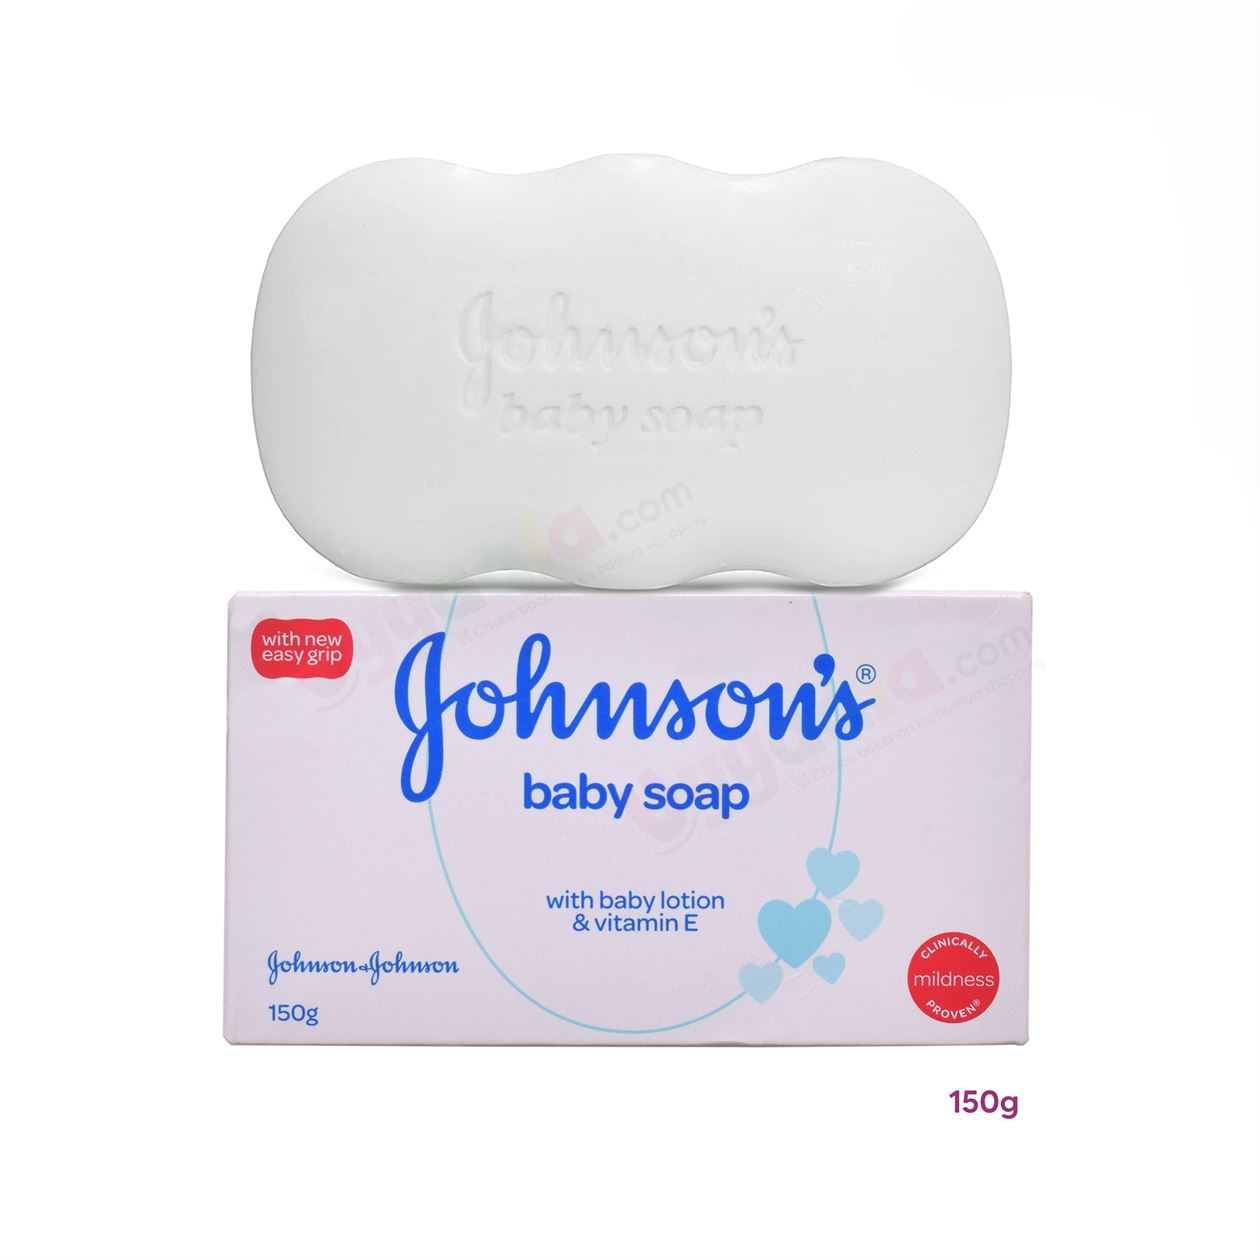 JOHNSON'S Baby Soap with baby lotion and vitamin E - 150gms